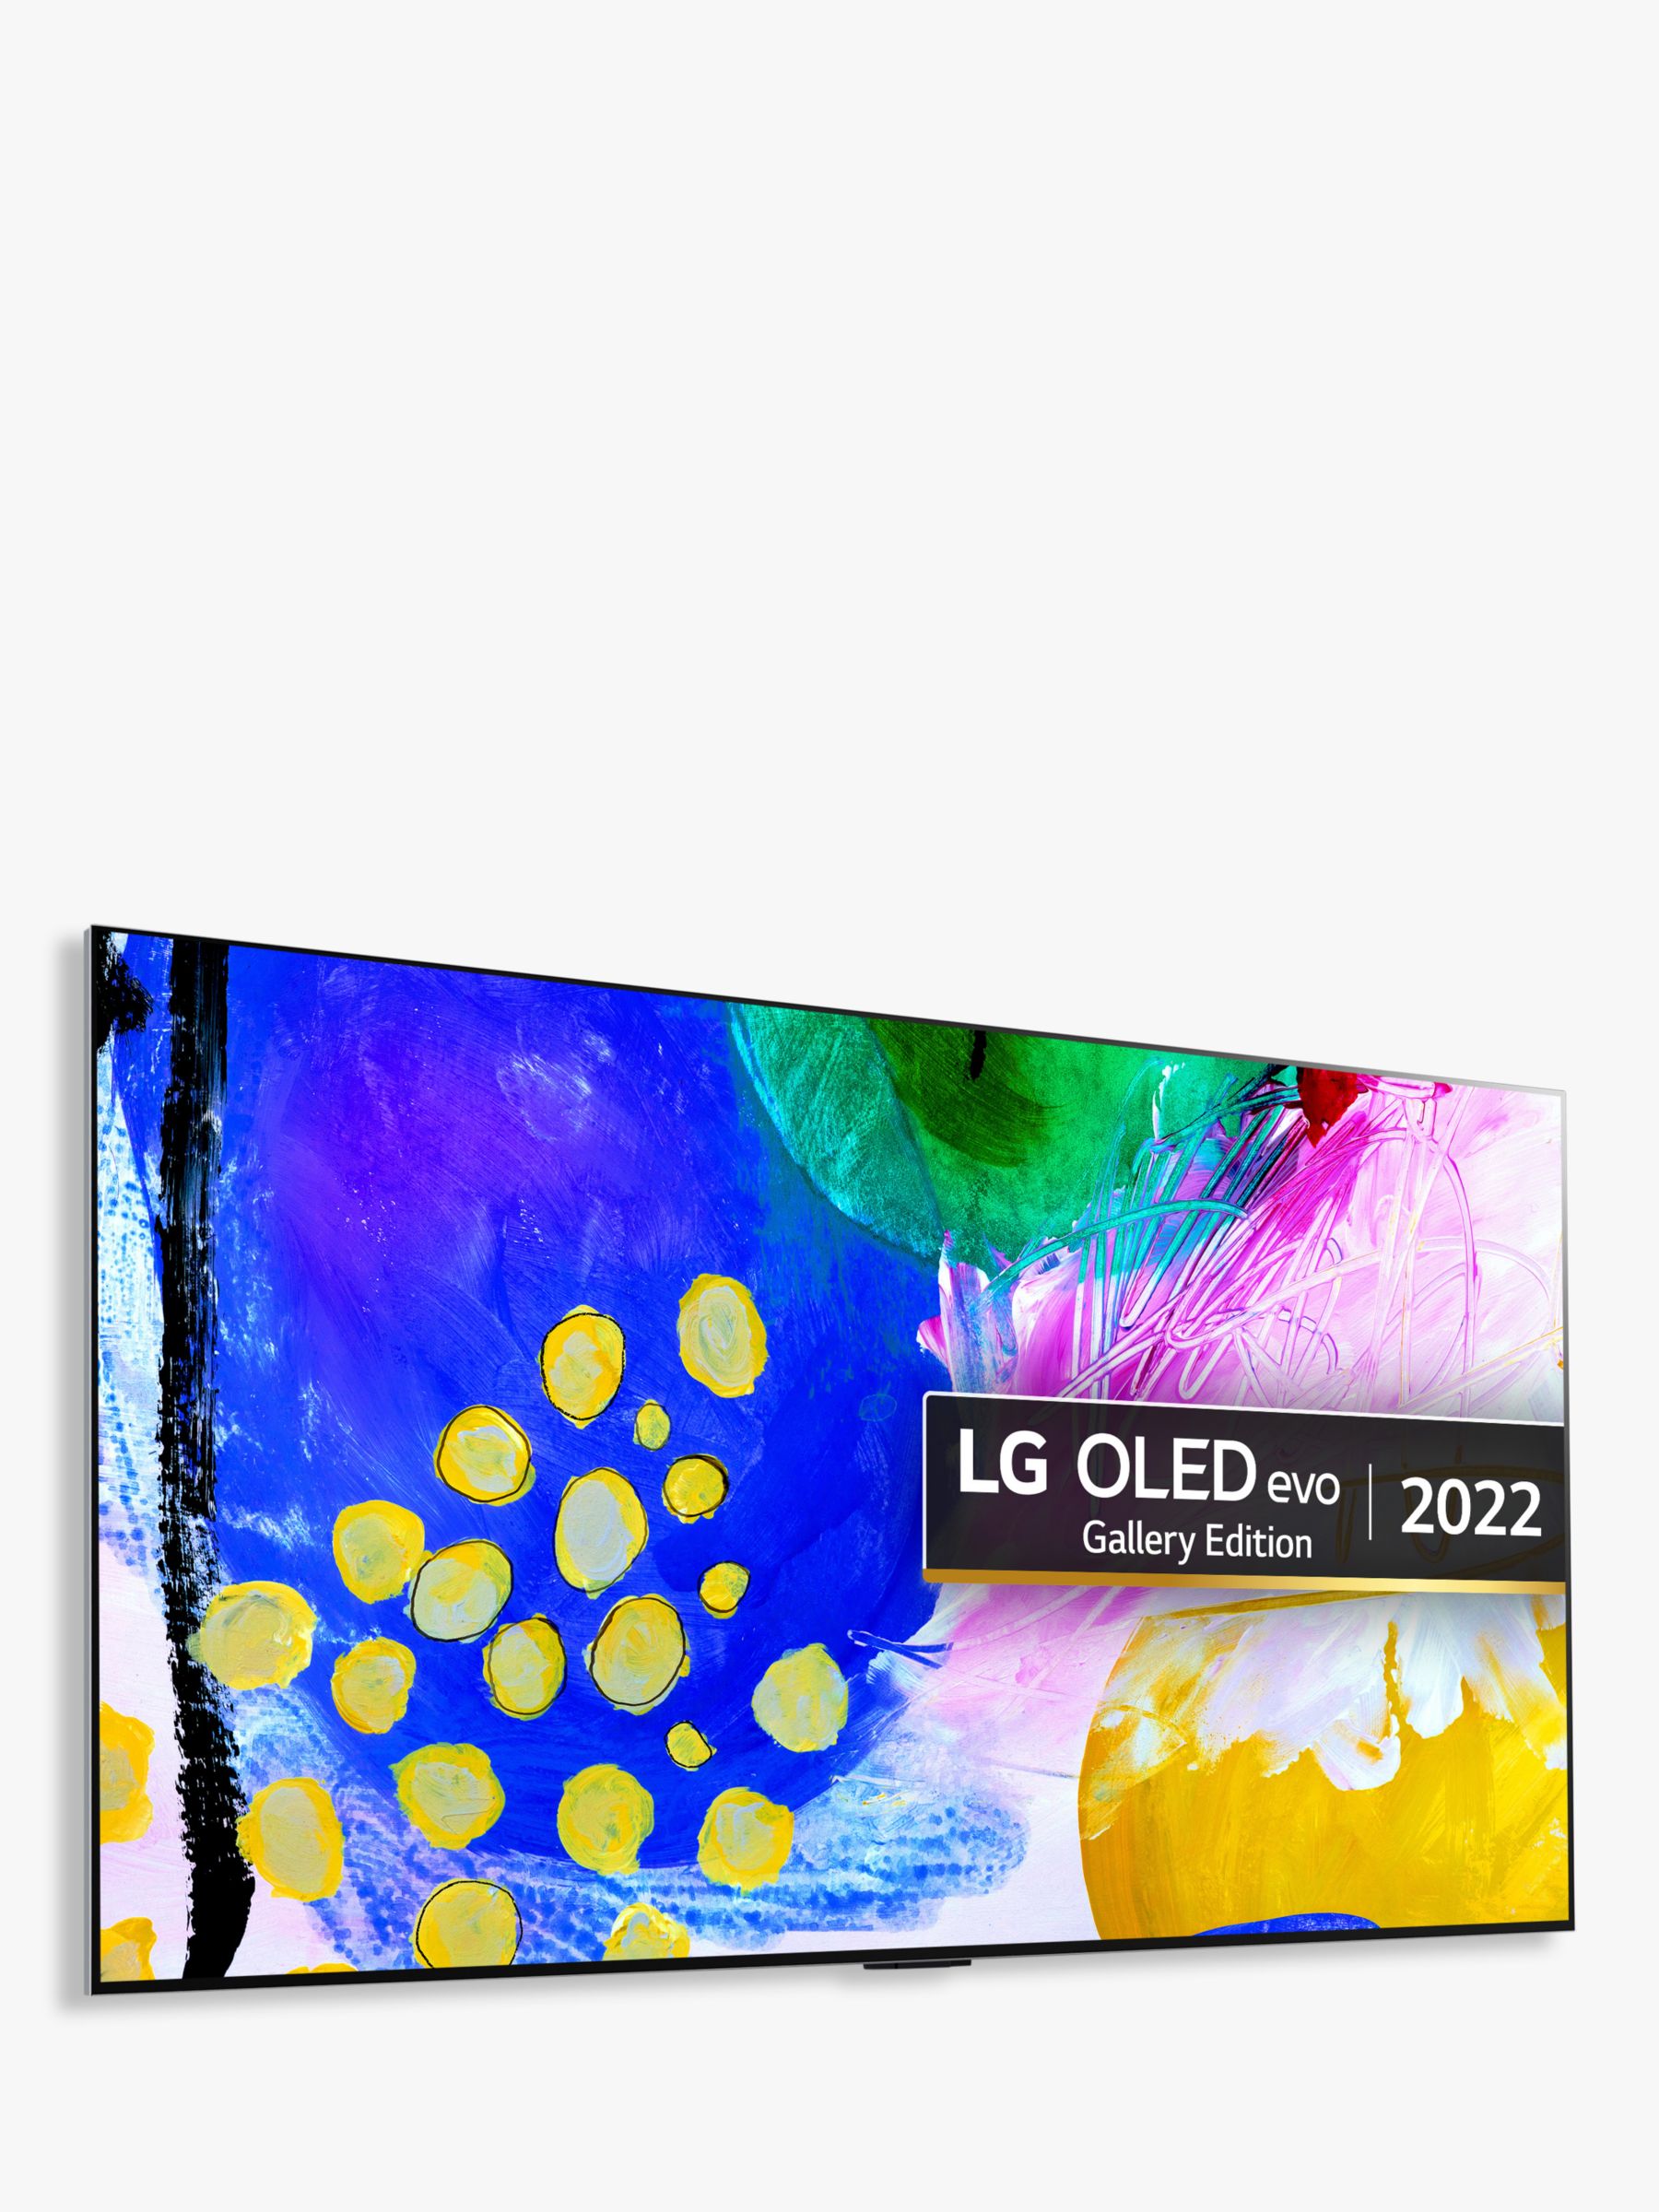 LG OLED55G26LA (2022) OLED HDR 4K Ultra HD Smart TV, 55 inch with Freeview HD/Freesat HD, Dolby Atmos & Gallery Design, Light Satin Silver